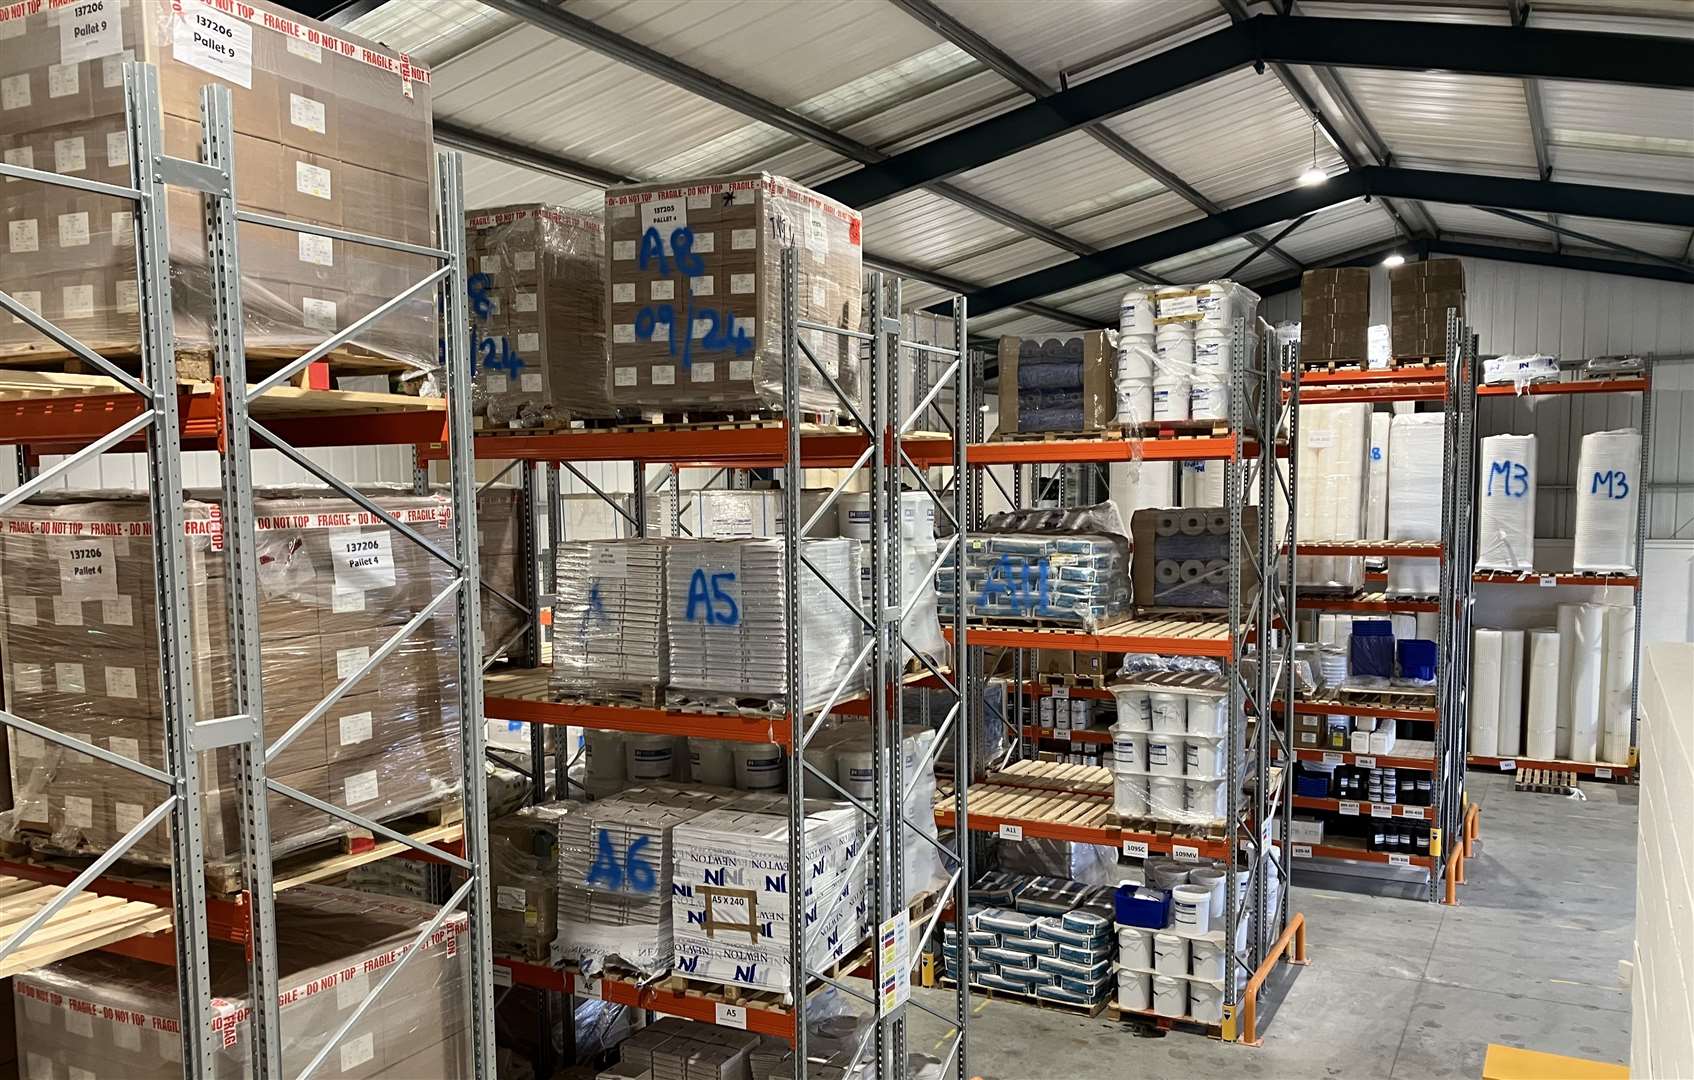 Last year, Newton Waterproofing opened its new northern branch and distribution centre in Leeds.